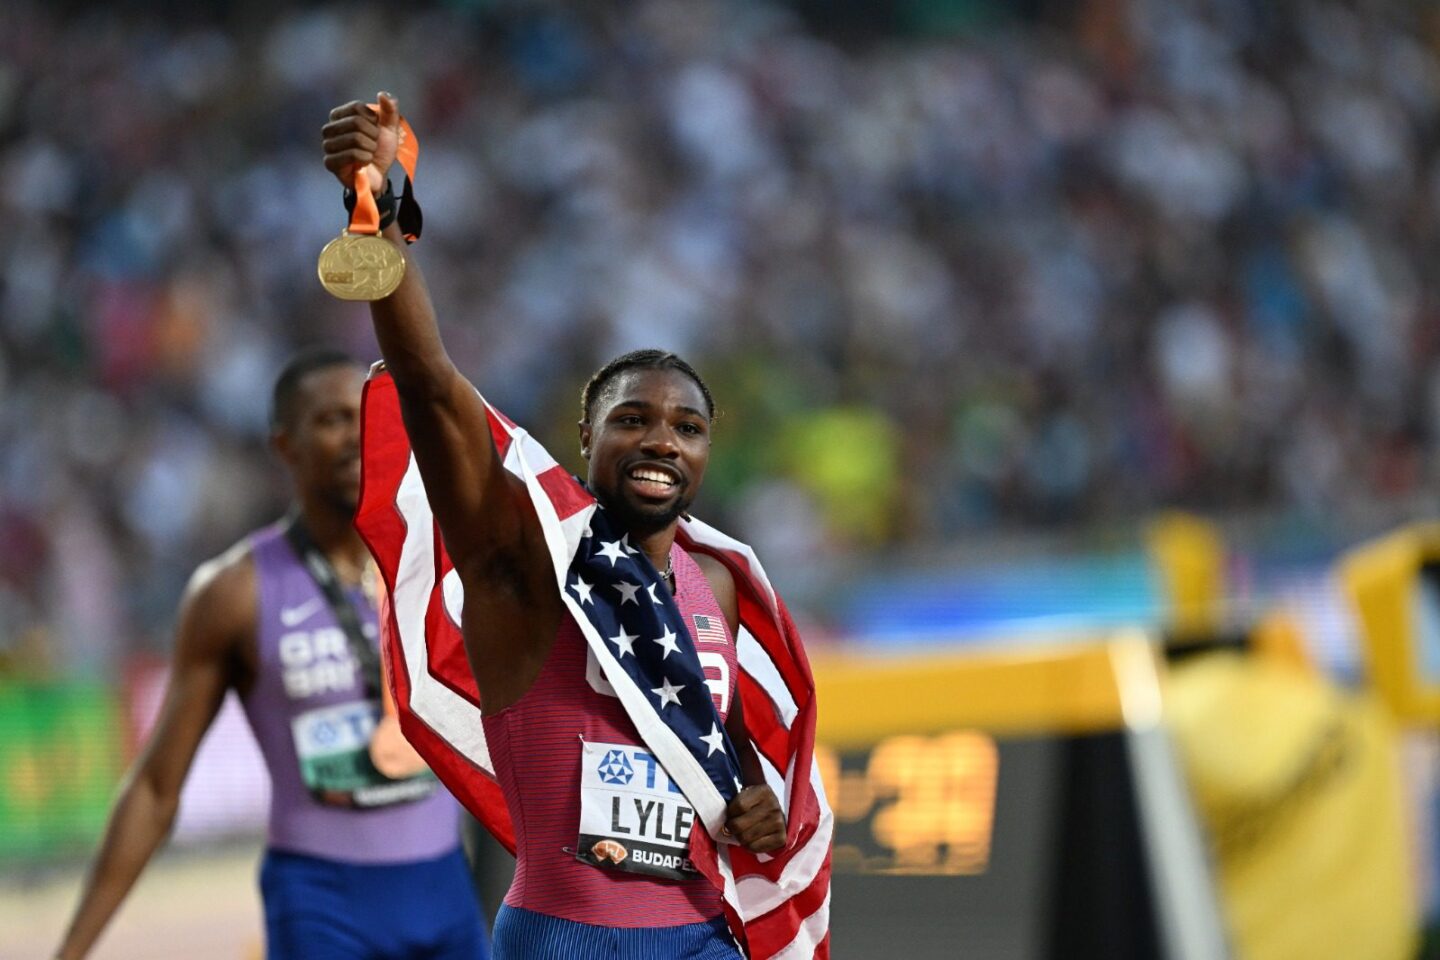 noah-lyles-sets-personal-best-in-boston-indoor-meet,-eyes-usain-bolt’s-world-records